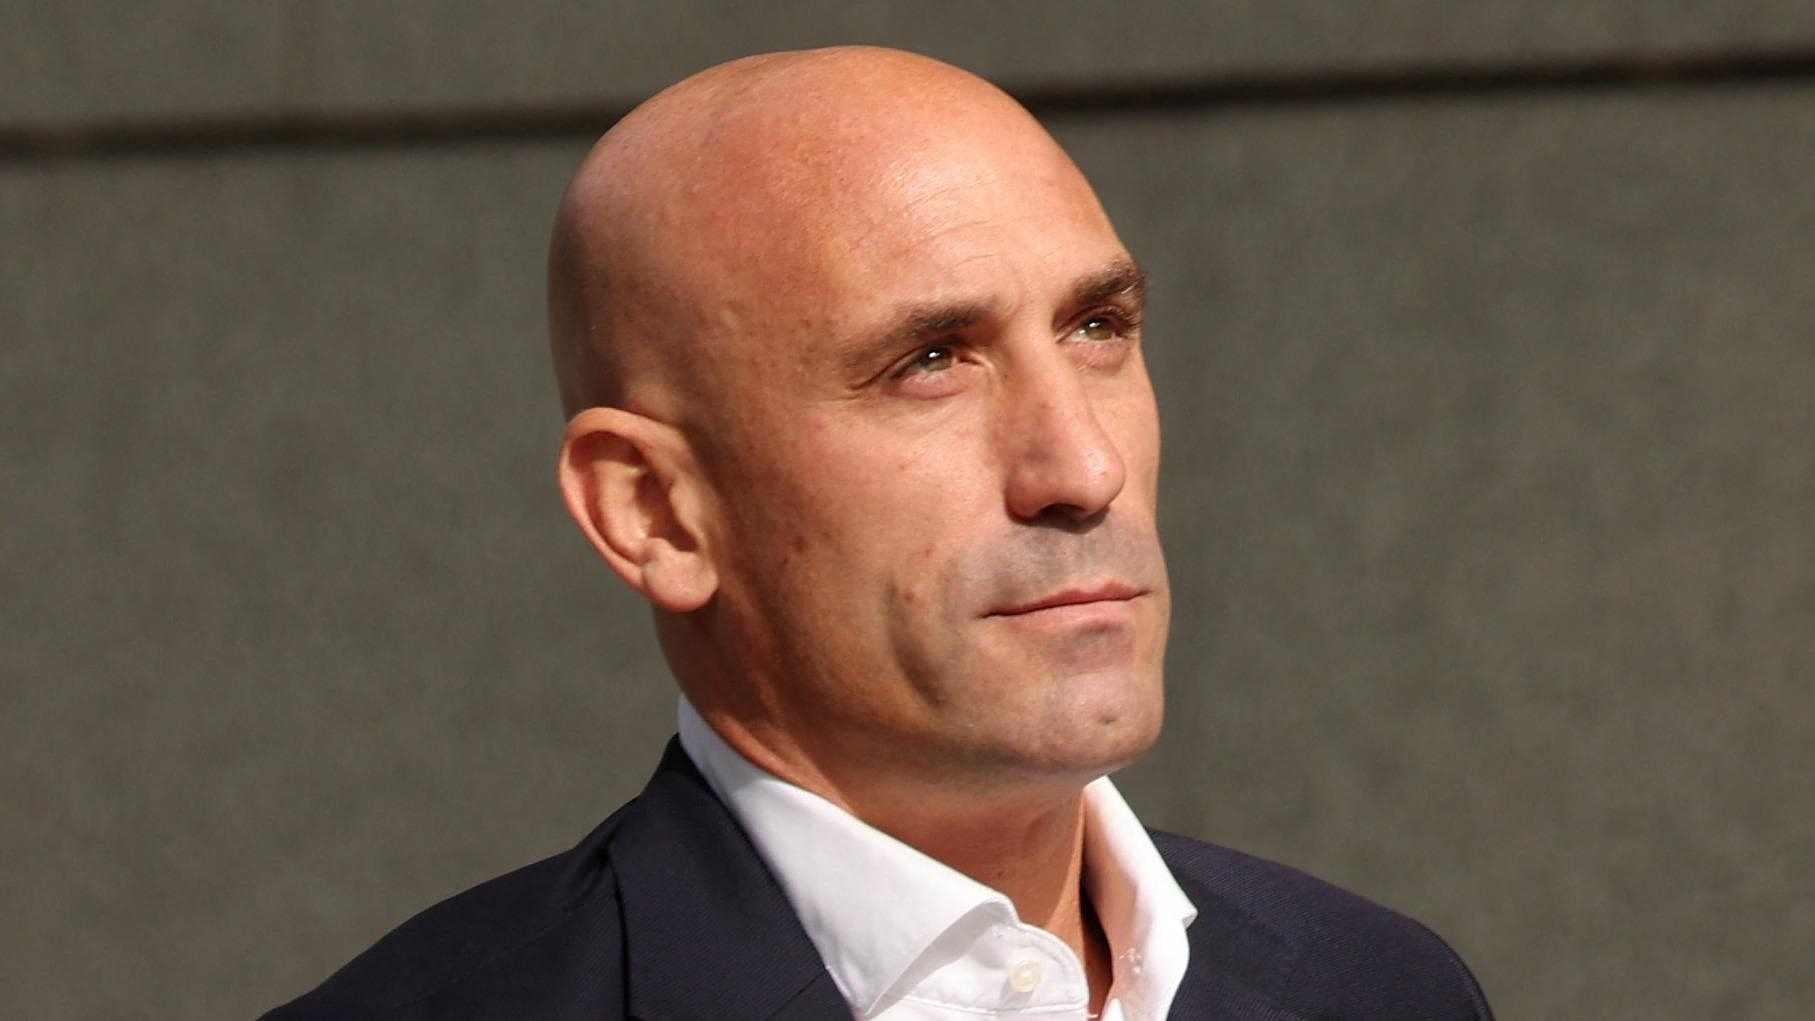 Forced kiss: 2 and a half years in prison required against Rubiales, ex-president of the Spanish Football Federation